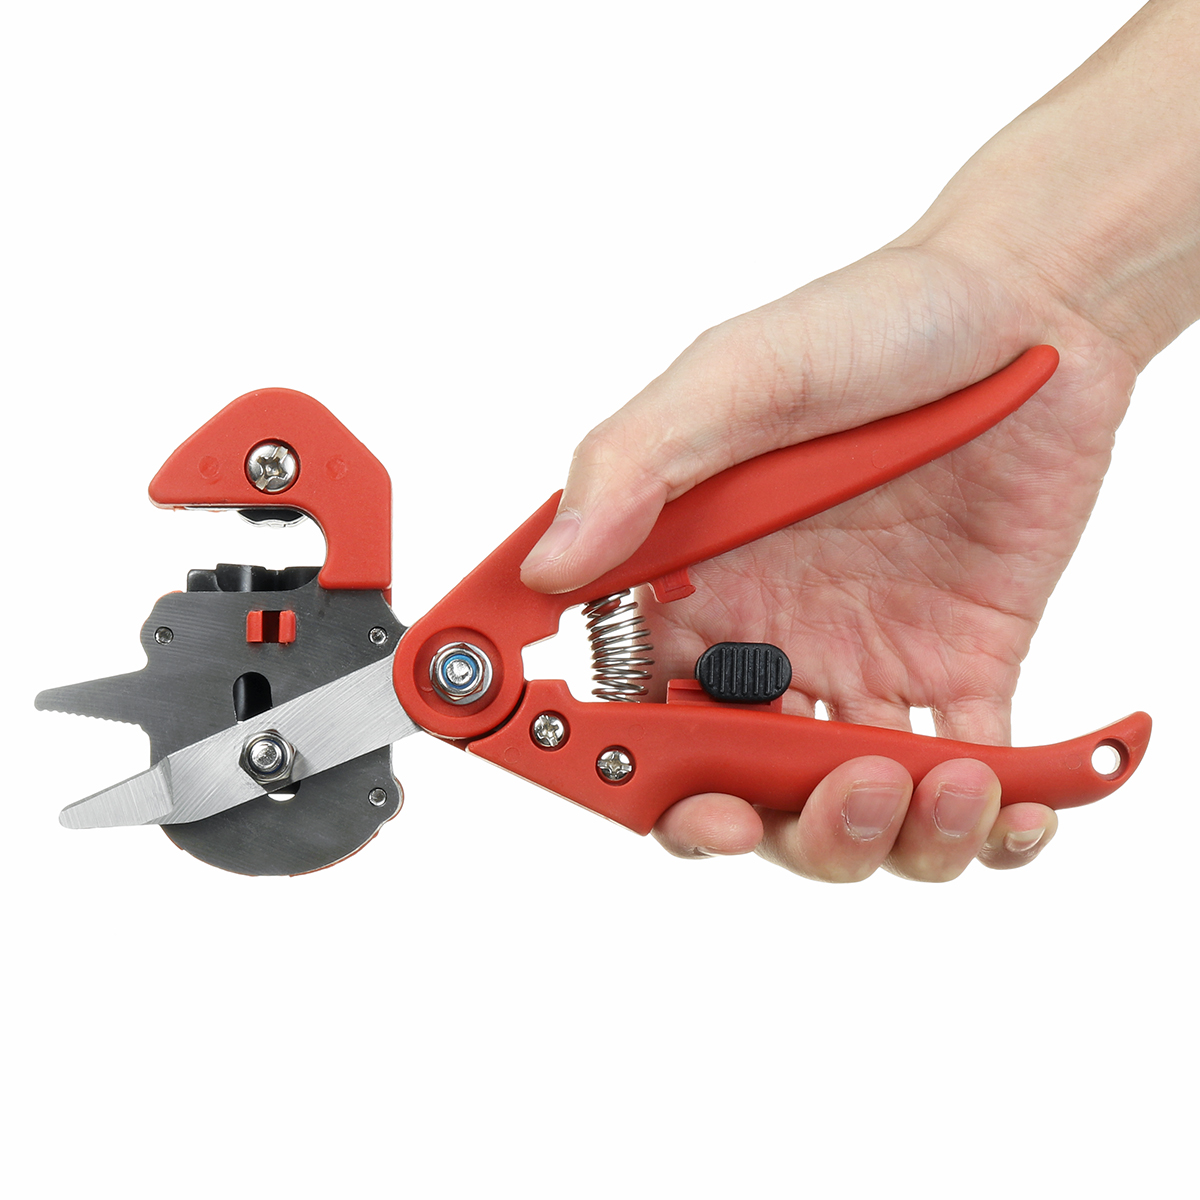 Find Garden Nursery Fruit Pruning Shears Grafting Scissor Tools Sets Tree Cutting Set for Sale on Gipsybee.com with cryptocurrencies